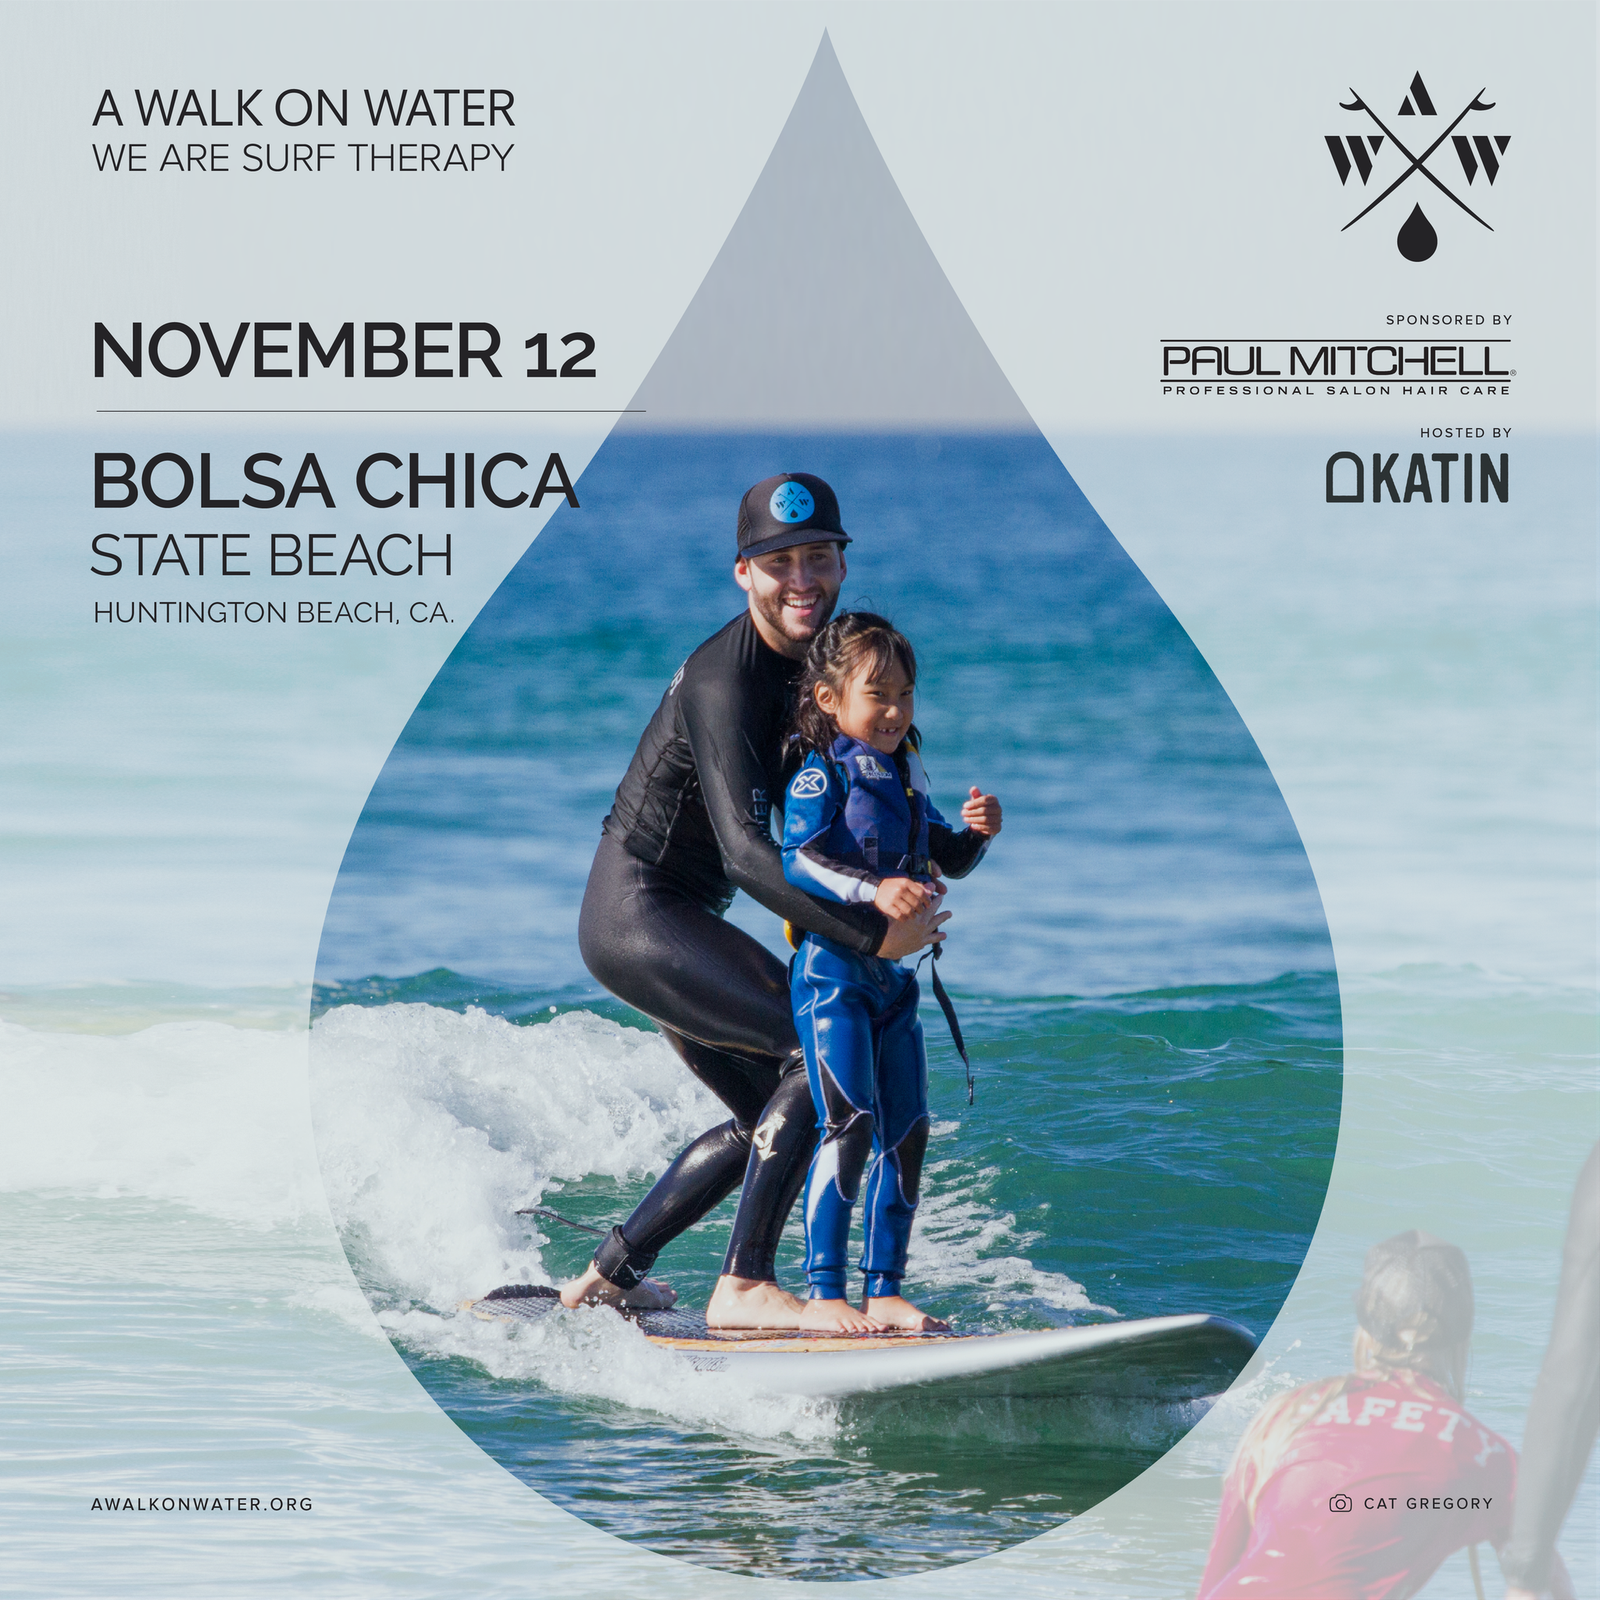 SAVE THE DATE: Katin Presents A Walk On Water Surf Therapy Event